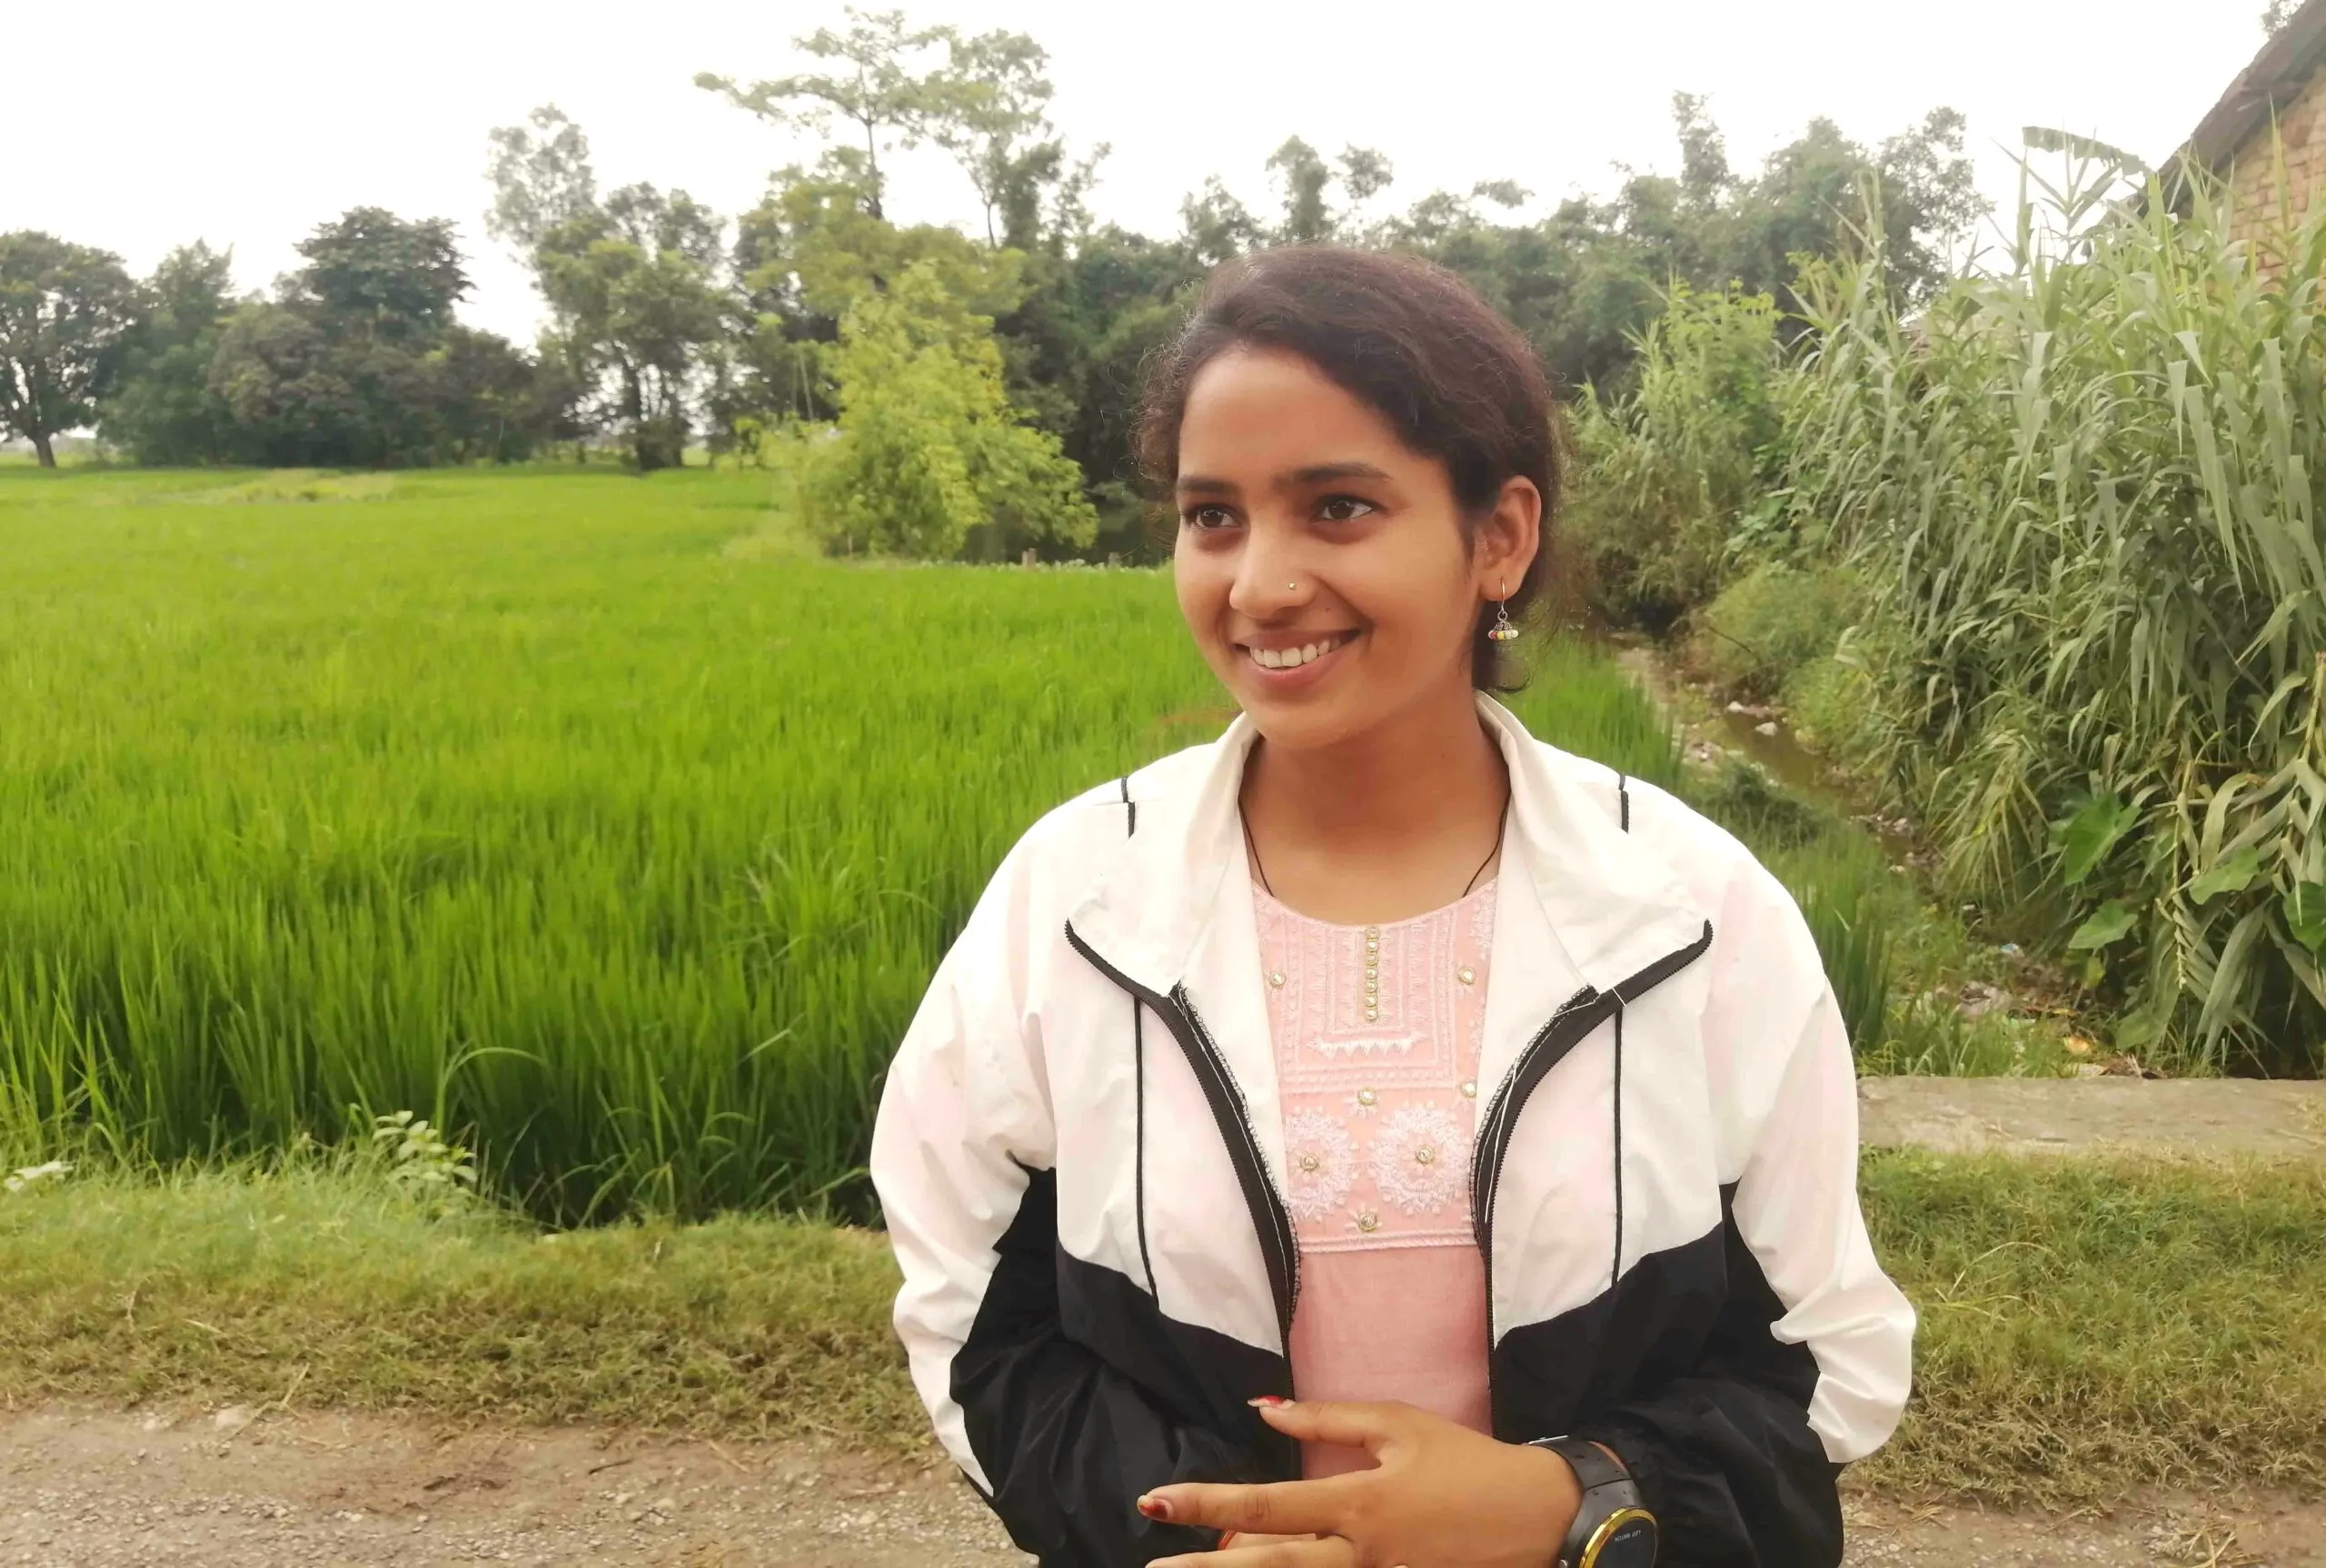 A young Nepalese girl wearing a traditional kameez tunic and a light jacket, standing in a rural setting with a paddy field in the background, looking sideways and smiling beautifully at the camera.